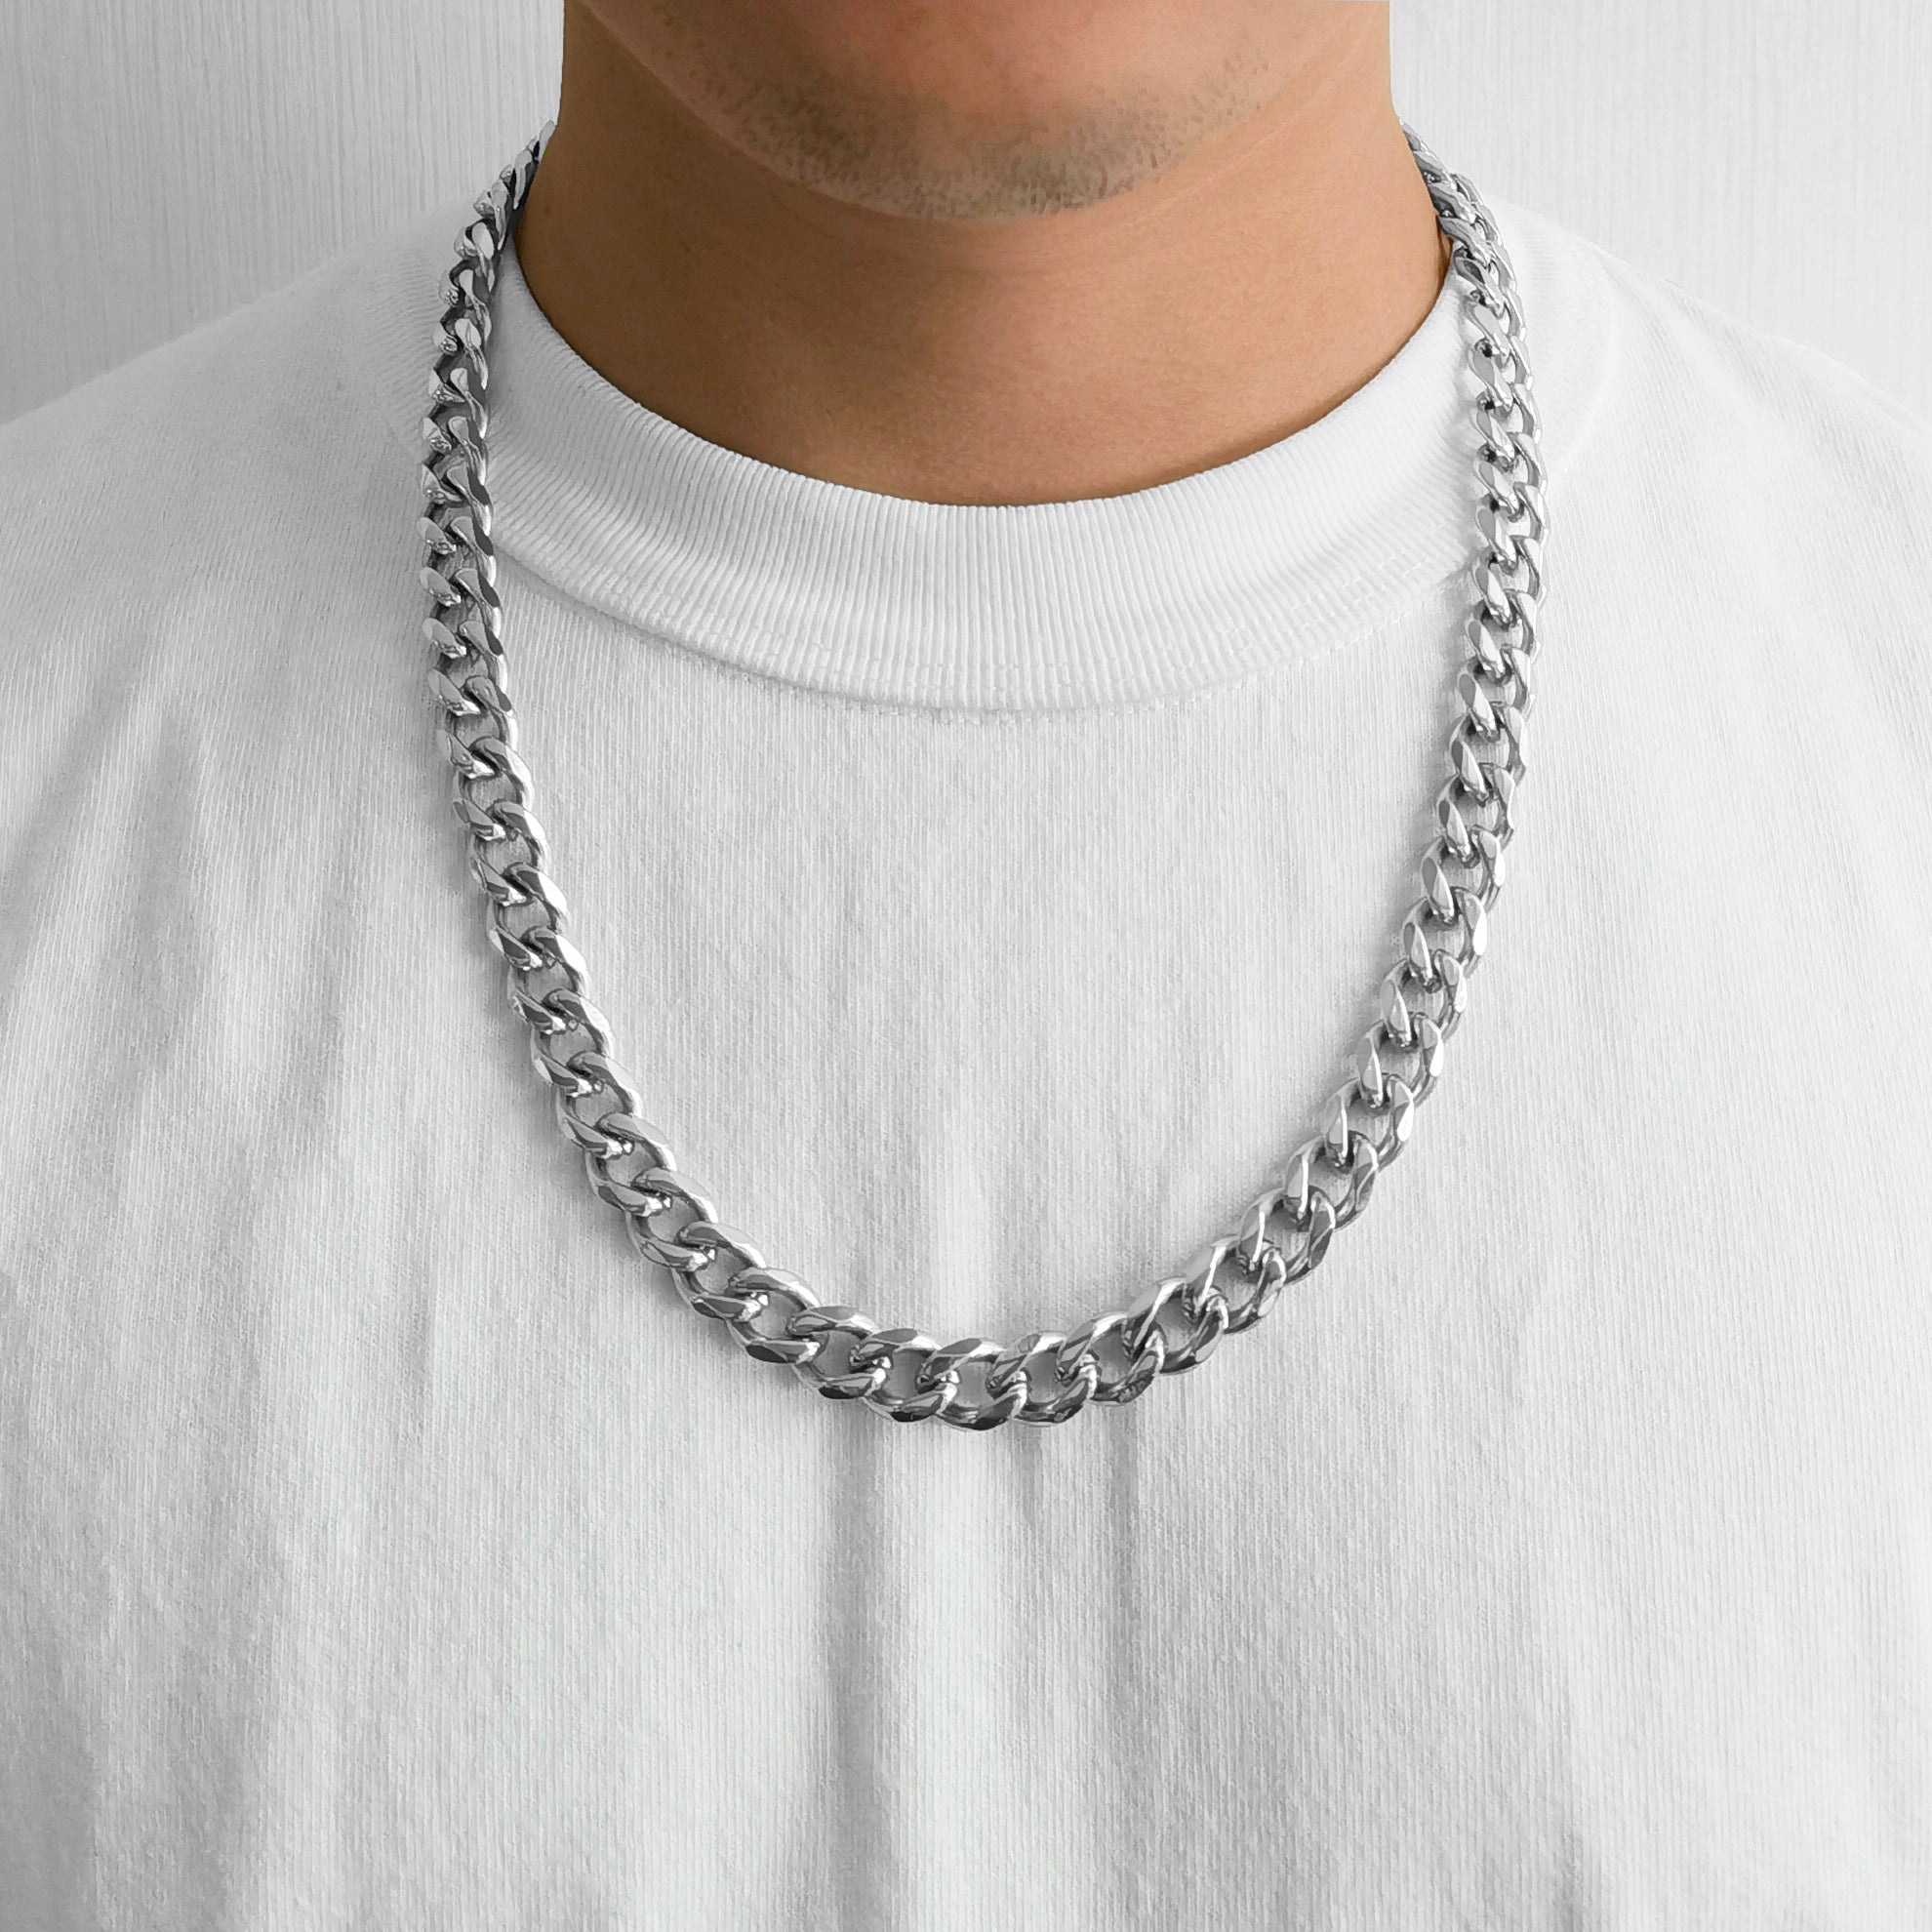 Men's 12mm Stainless Steel 18-24 Inch Curb Chain Necklace